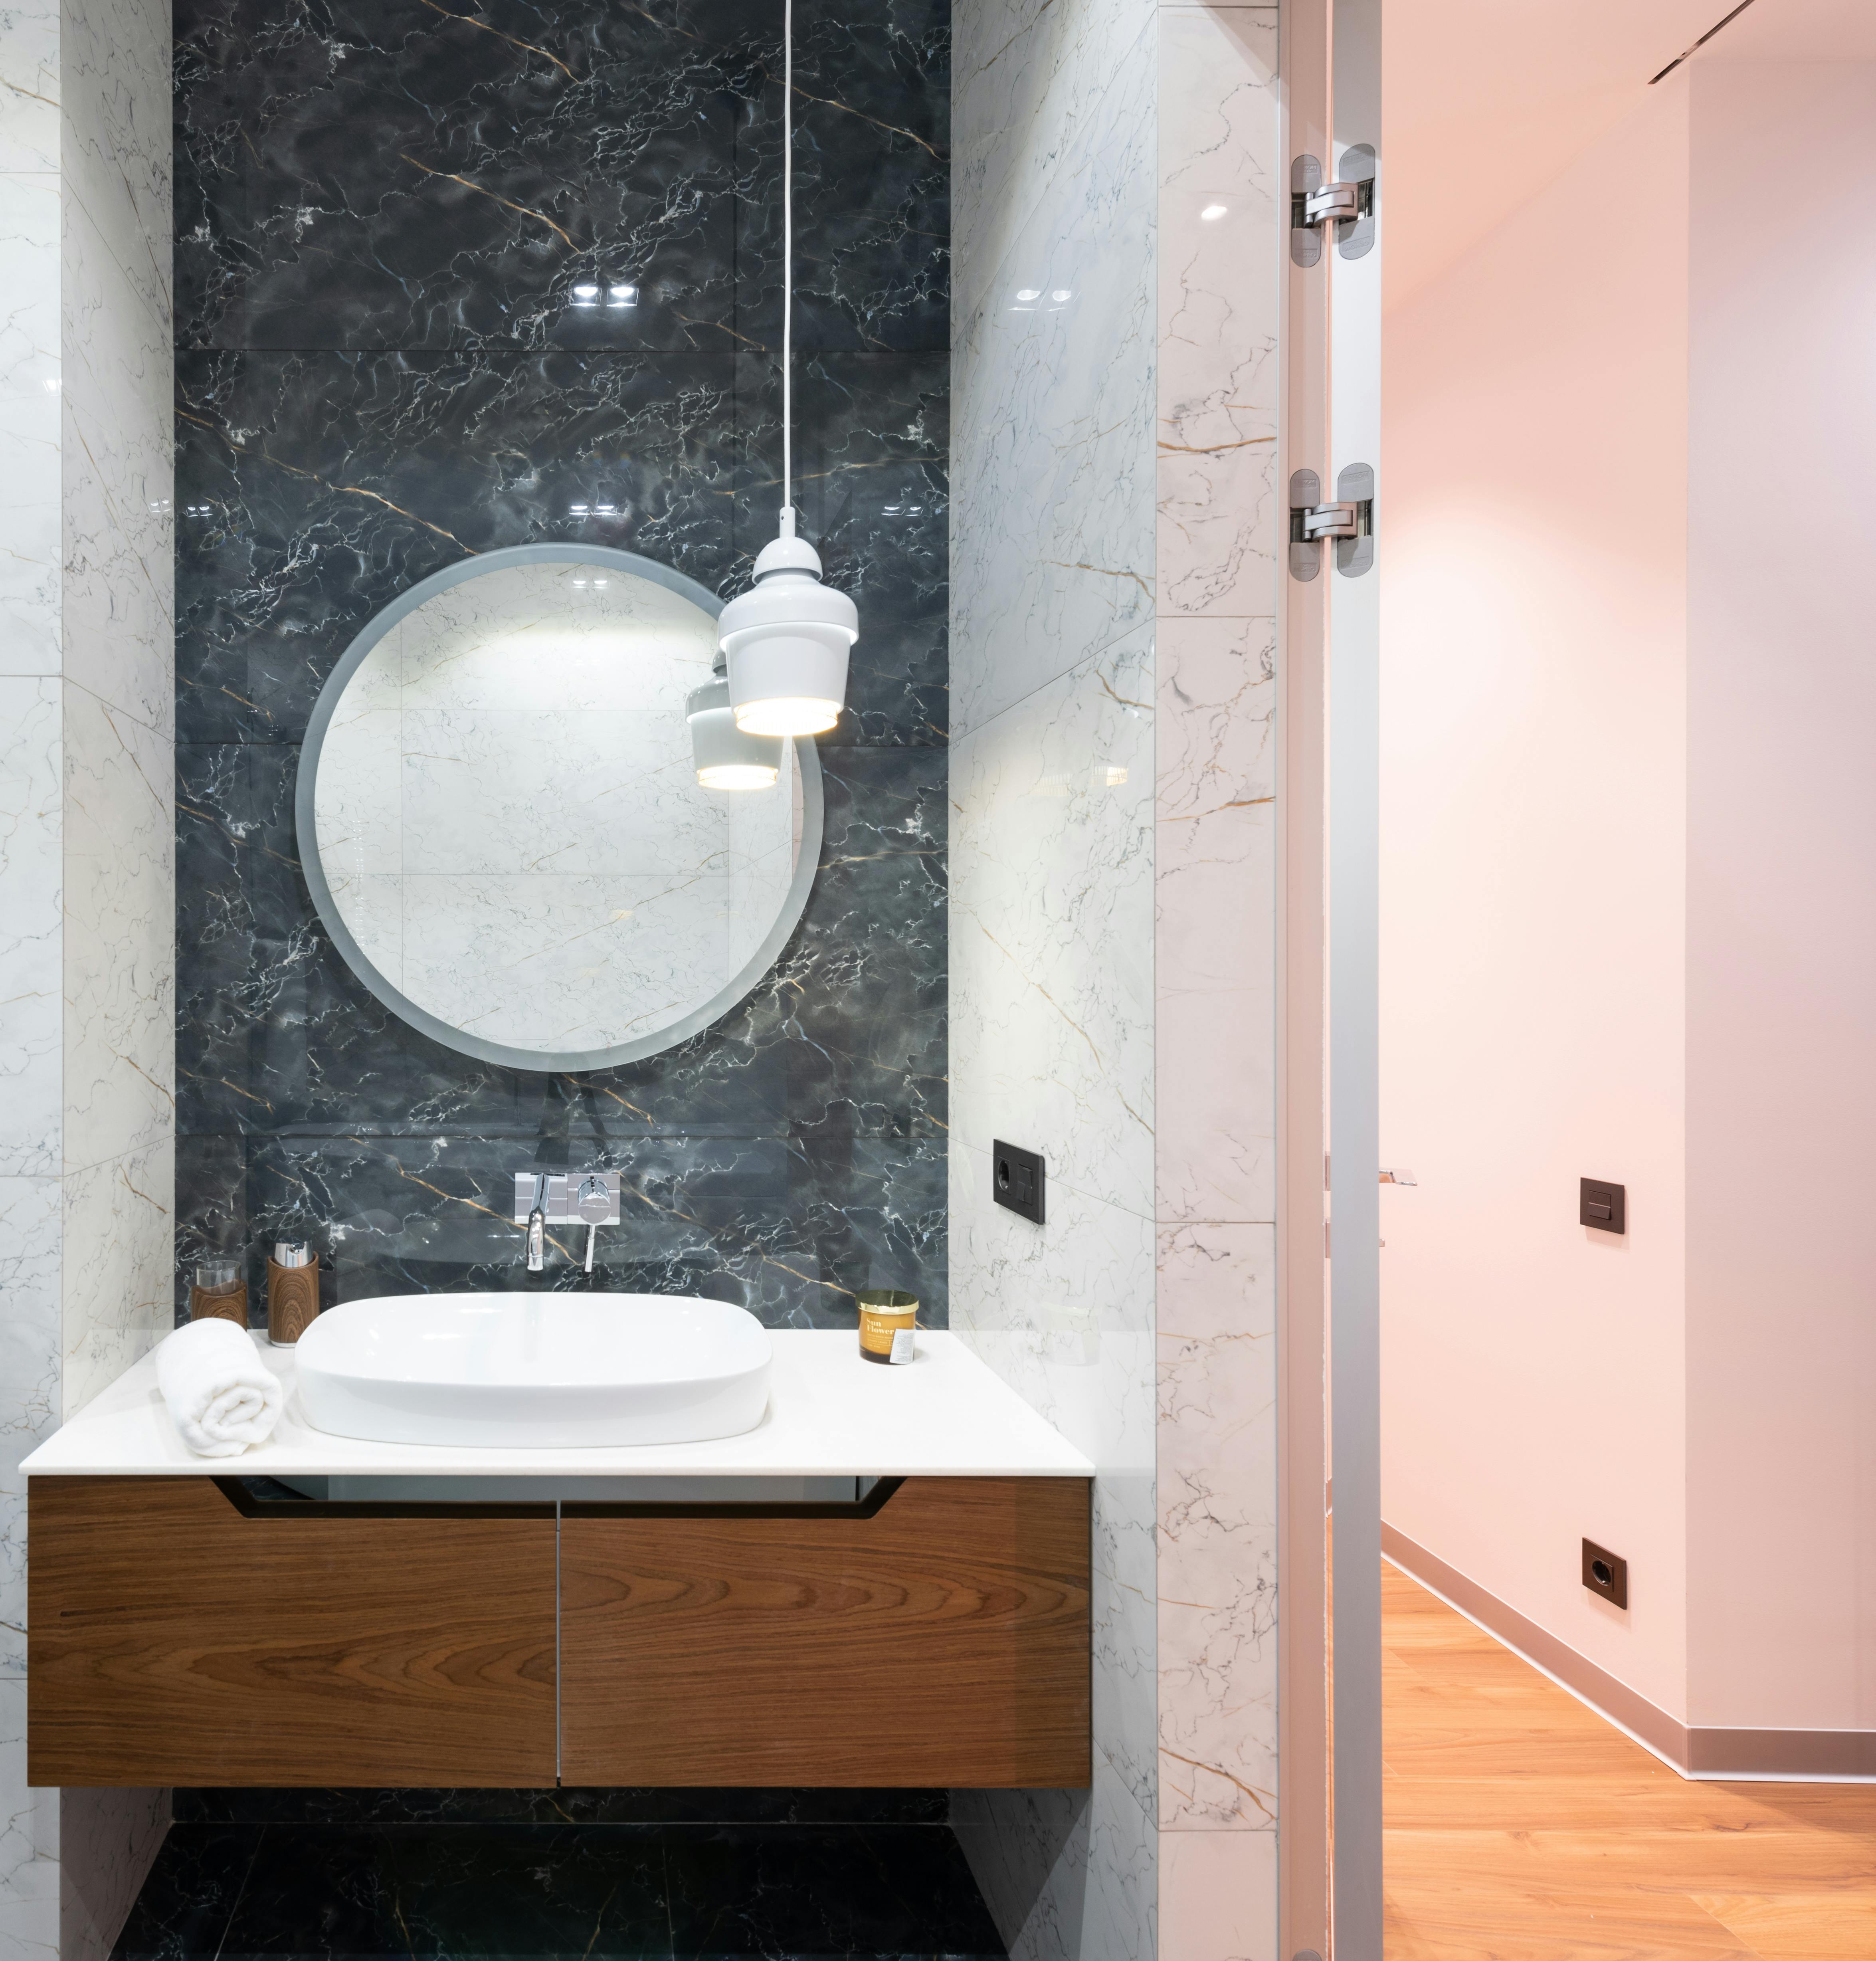 Interior of contemporary light bathroom with mirror and sink · Free Stock  Photo